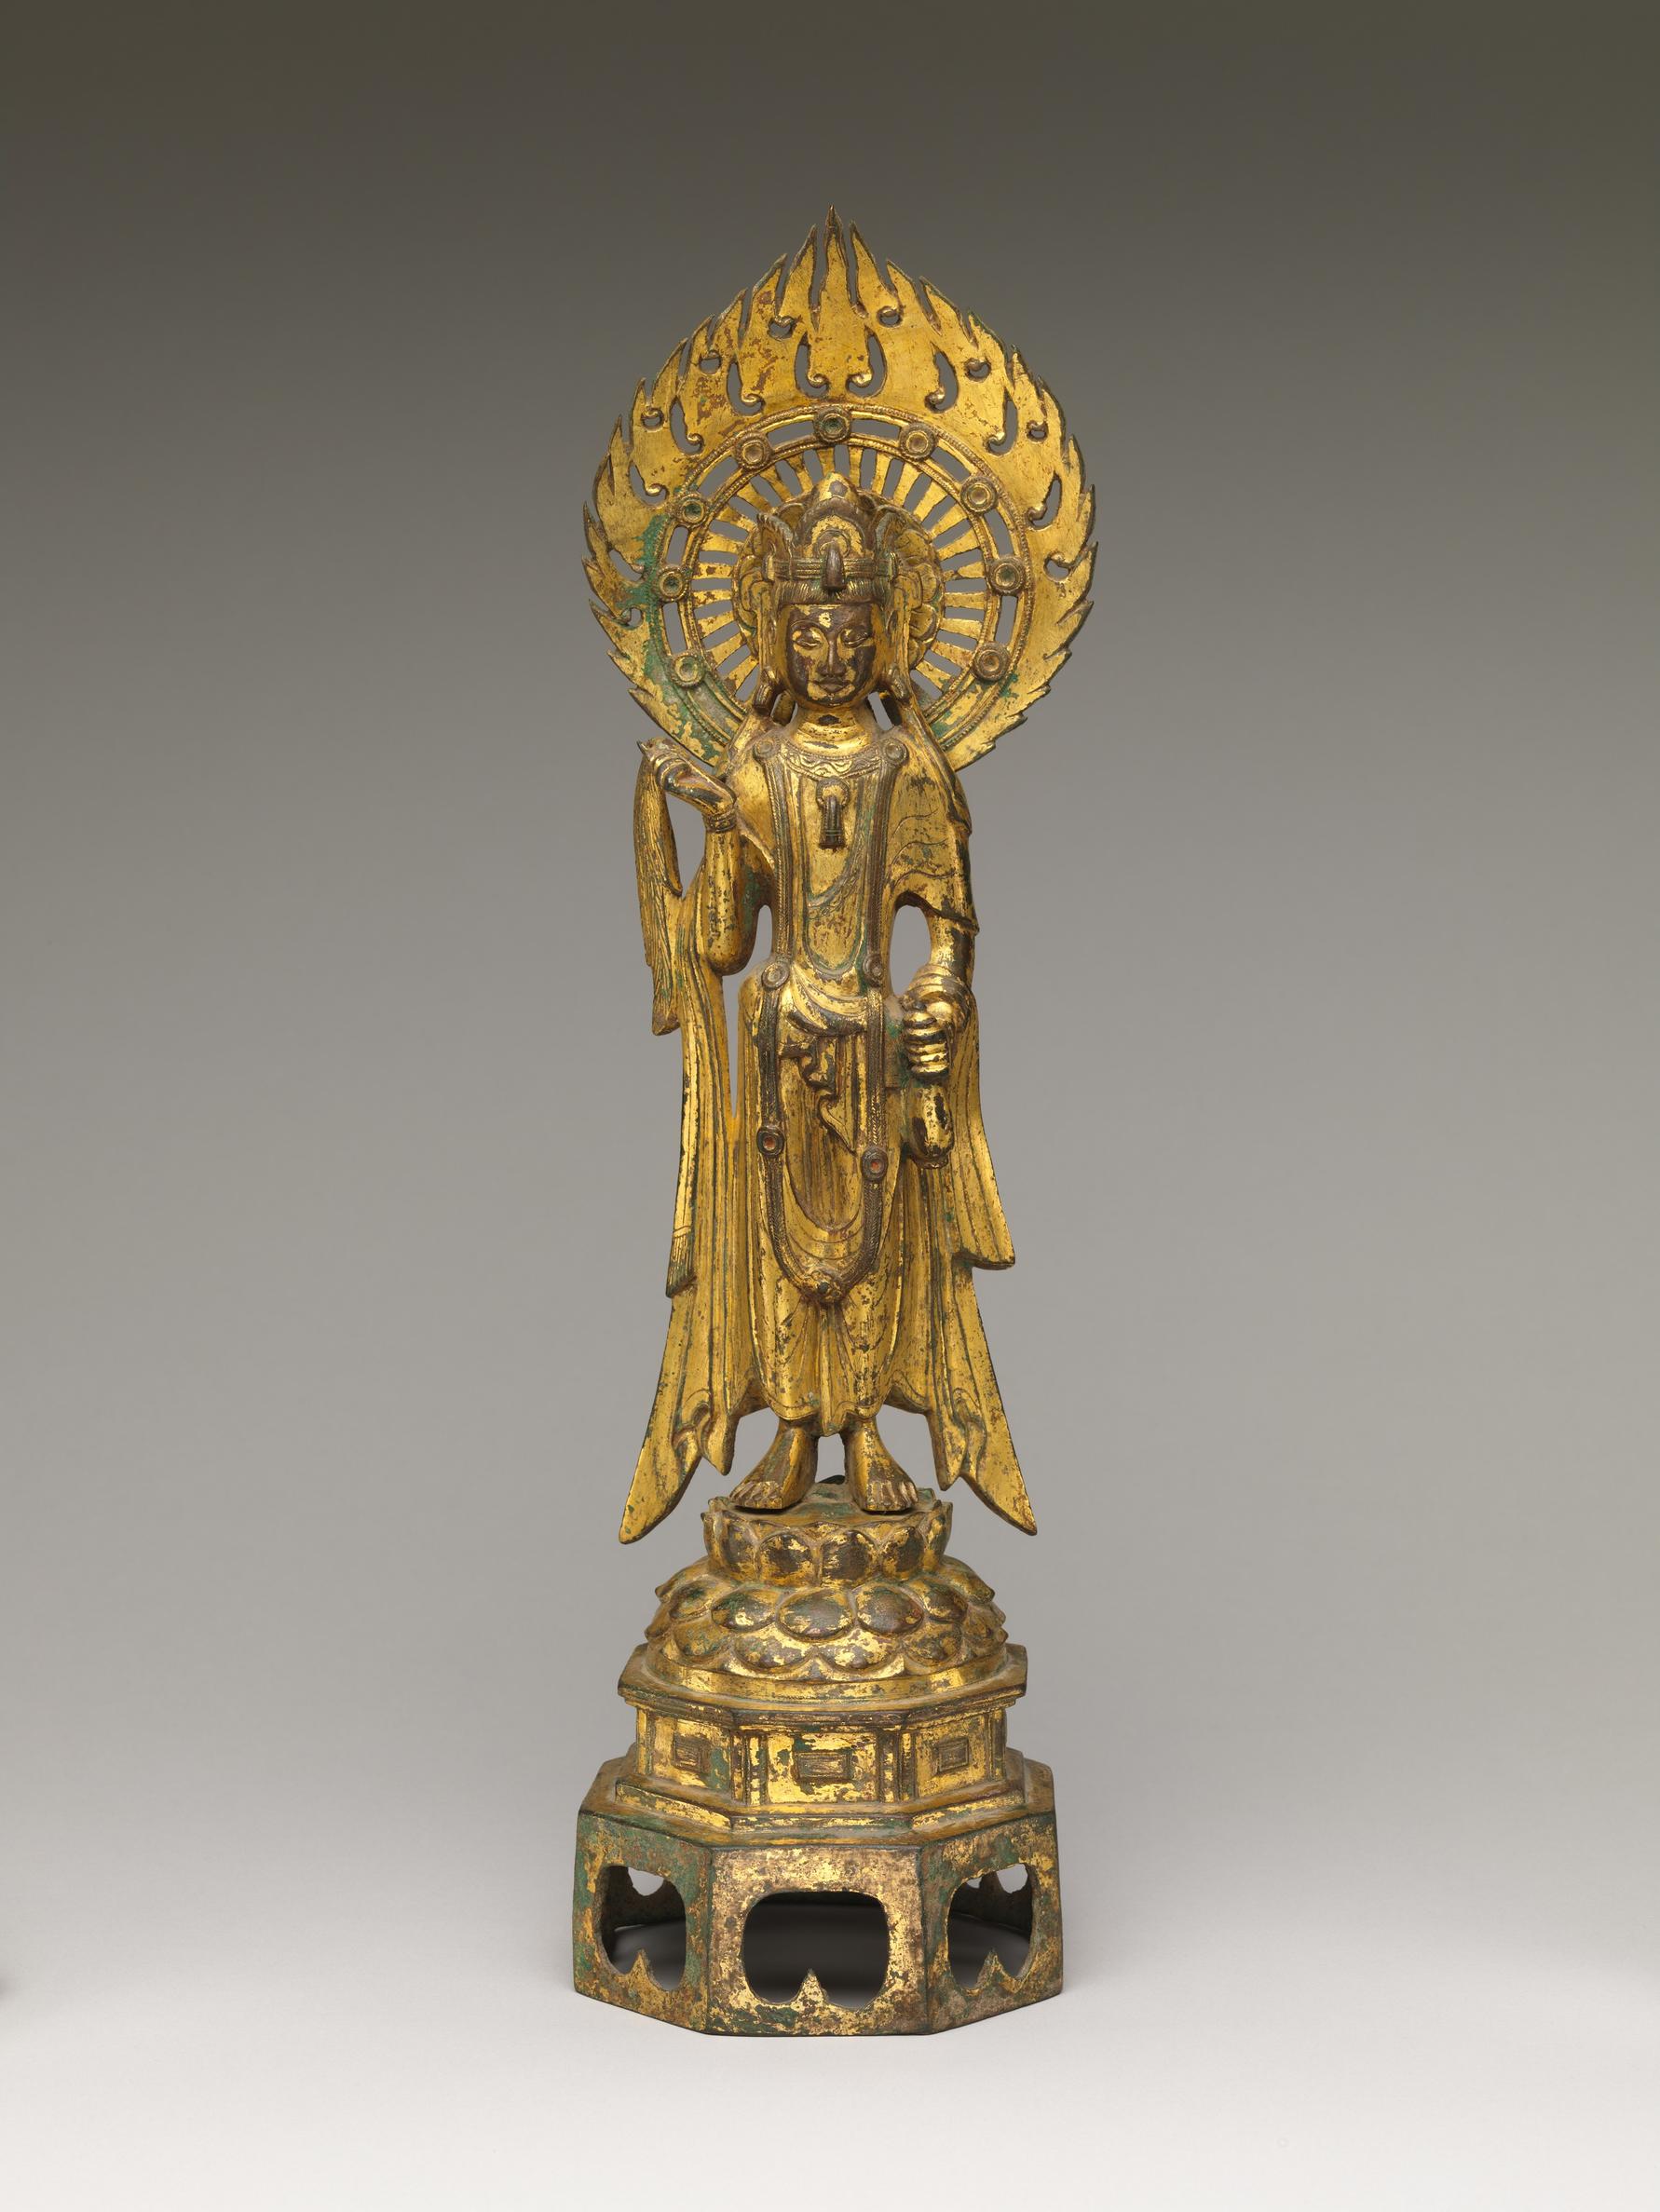 A gold statuette of the standing figure of Guanyin with a flaming circle behind their head.